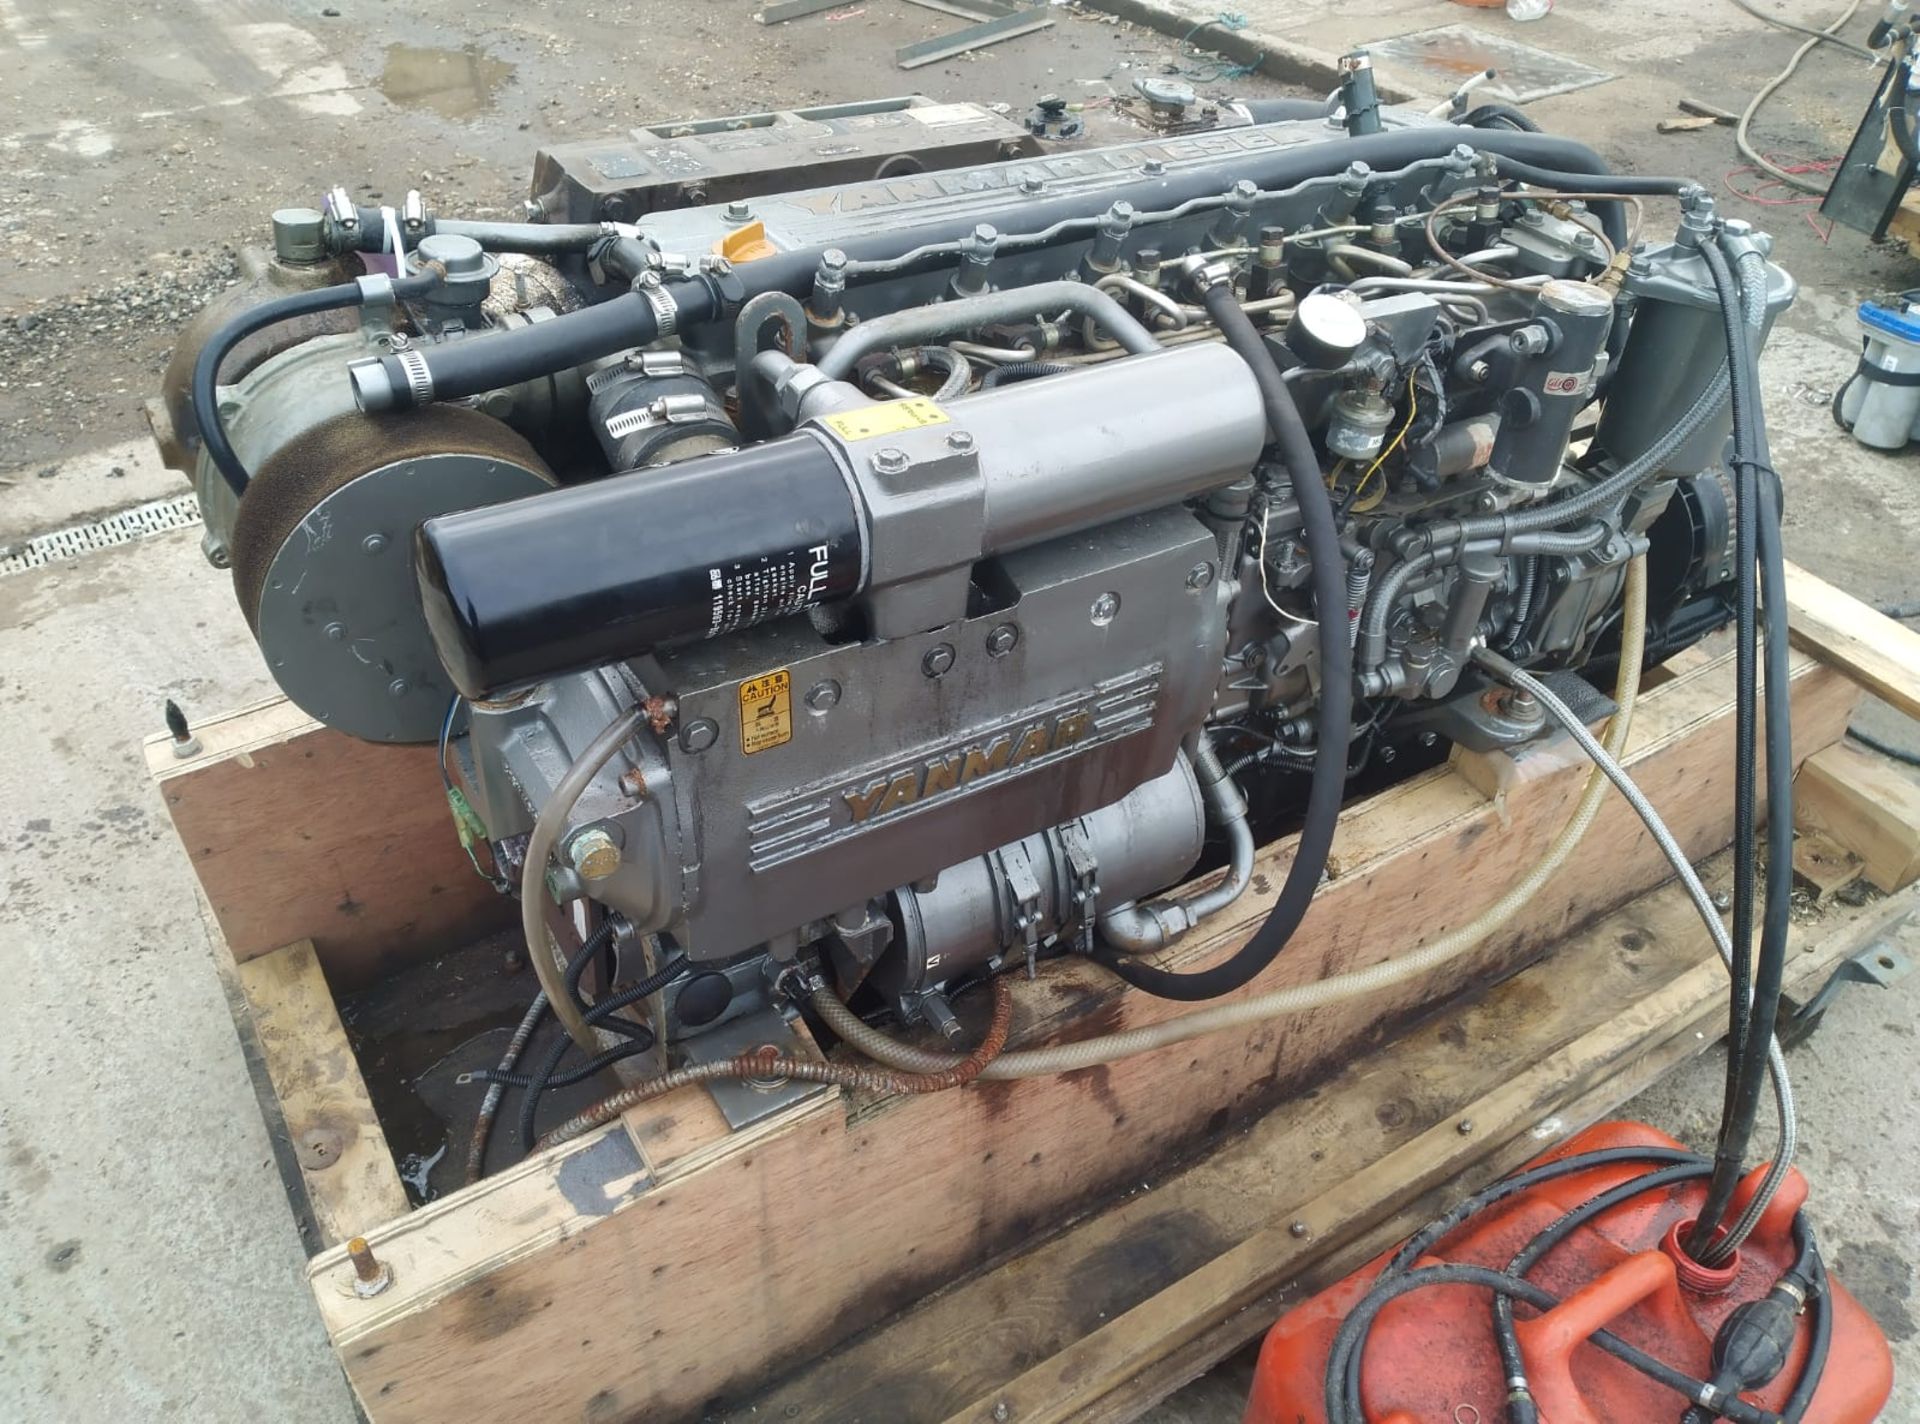 Yanmar RCD-6LY2X1 Diesel Boat Engine - 6LY2A-STP - 324kW (434HP) - Details in the description - Image 16 of 19